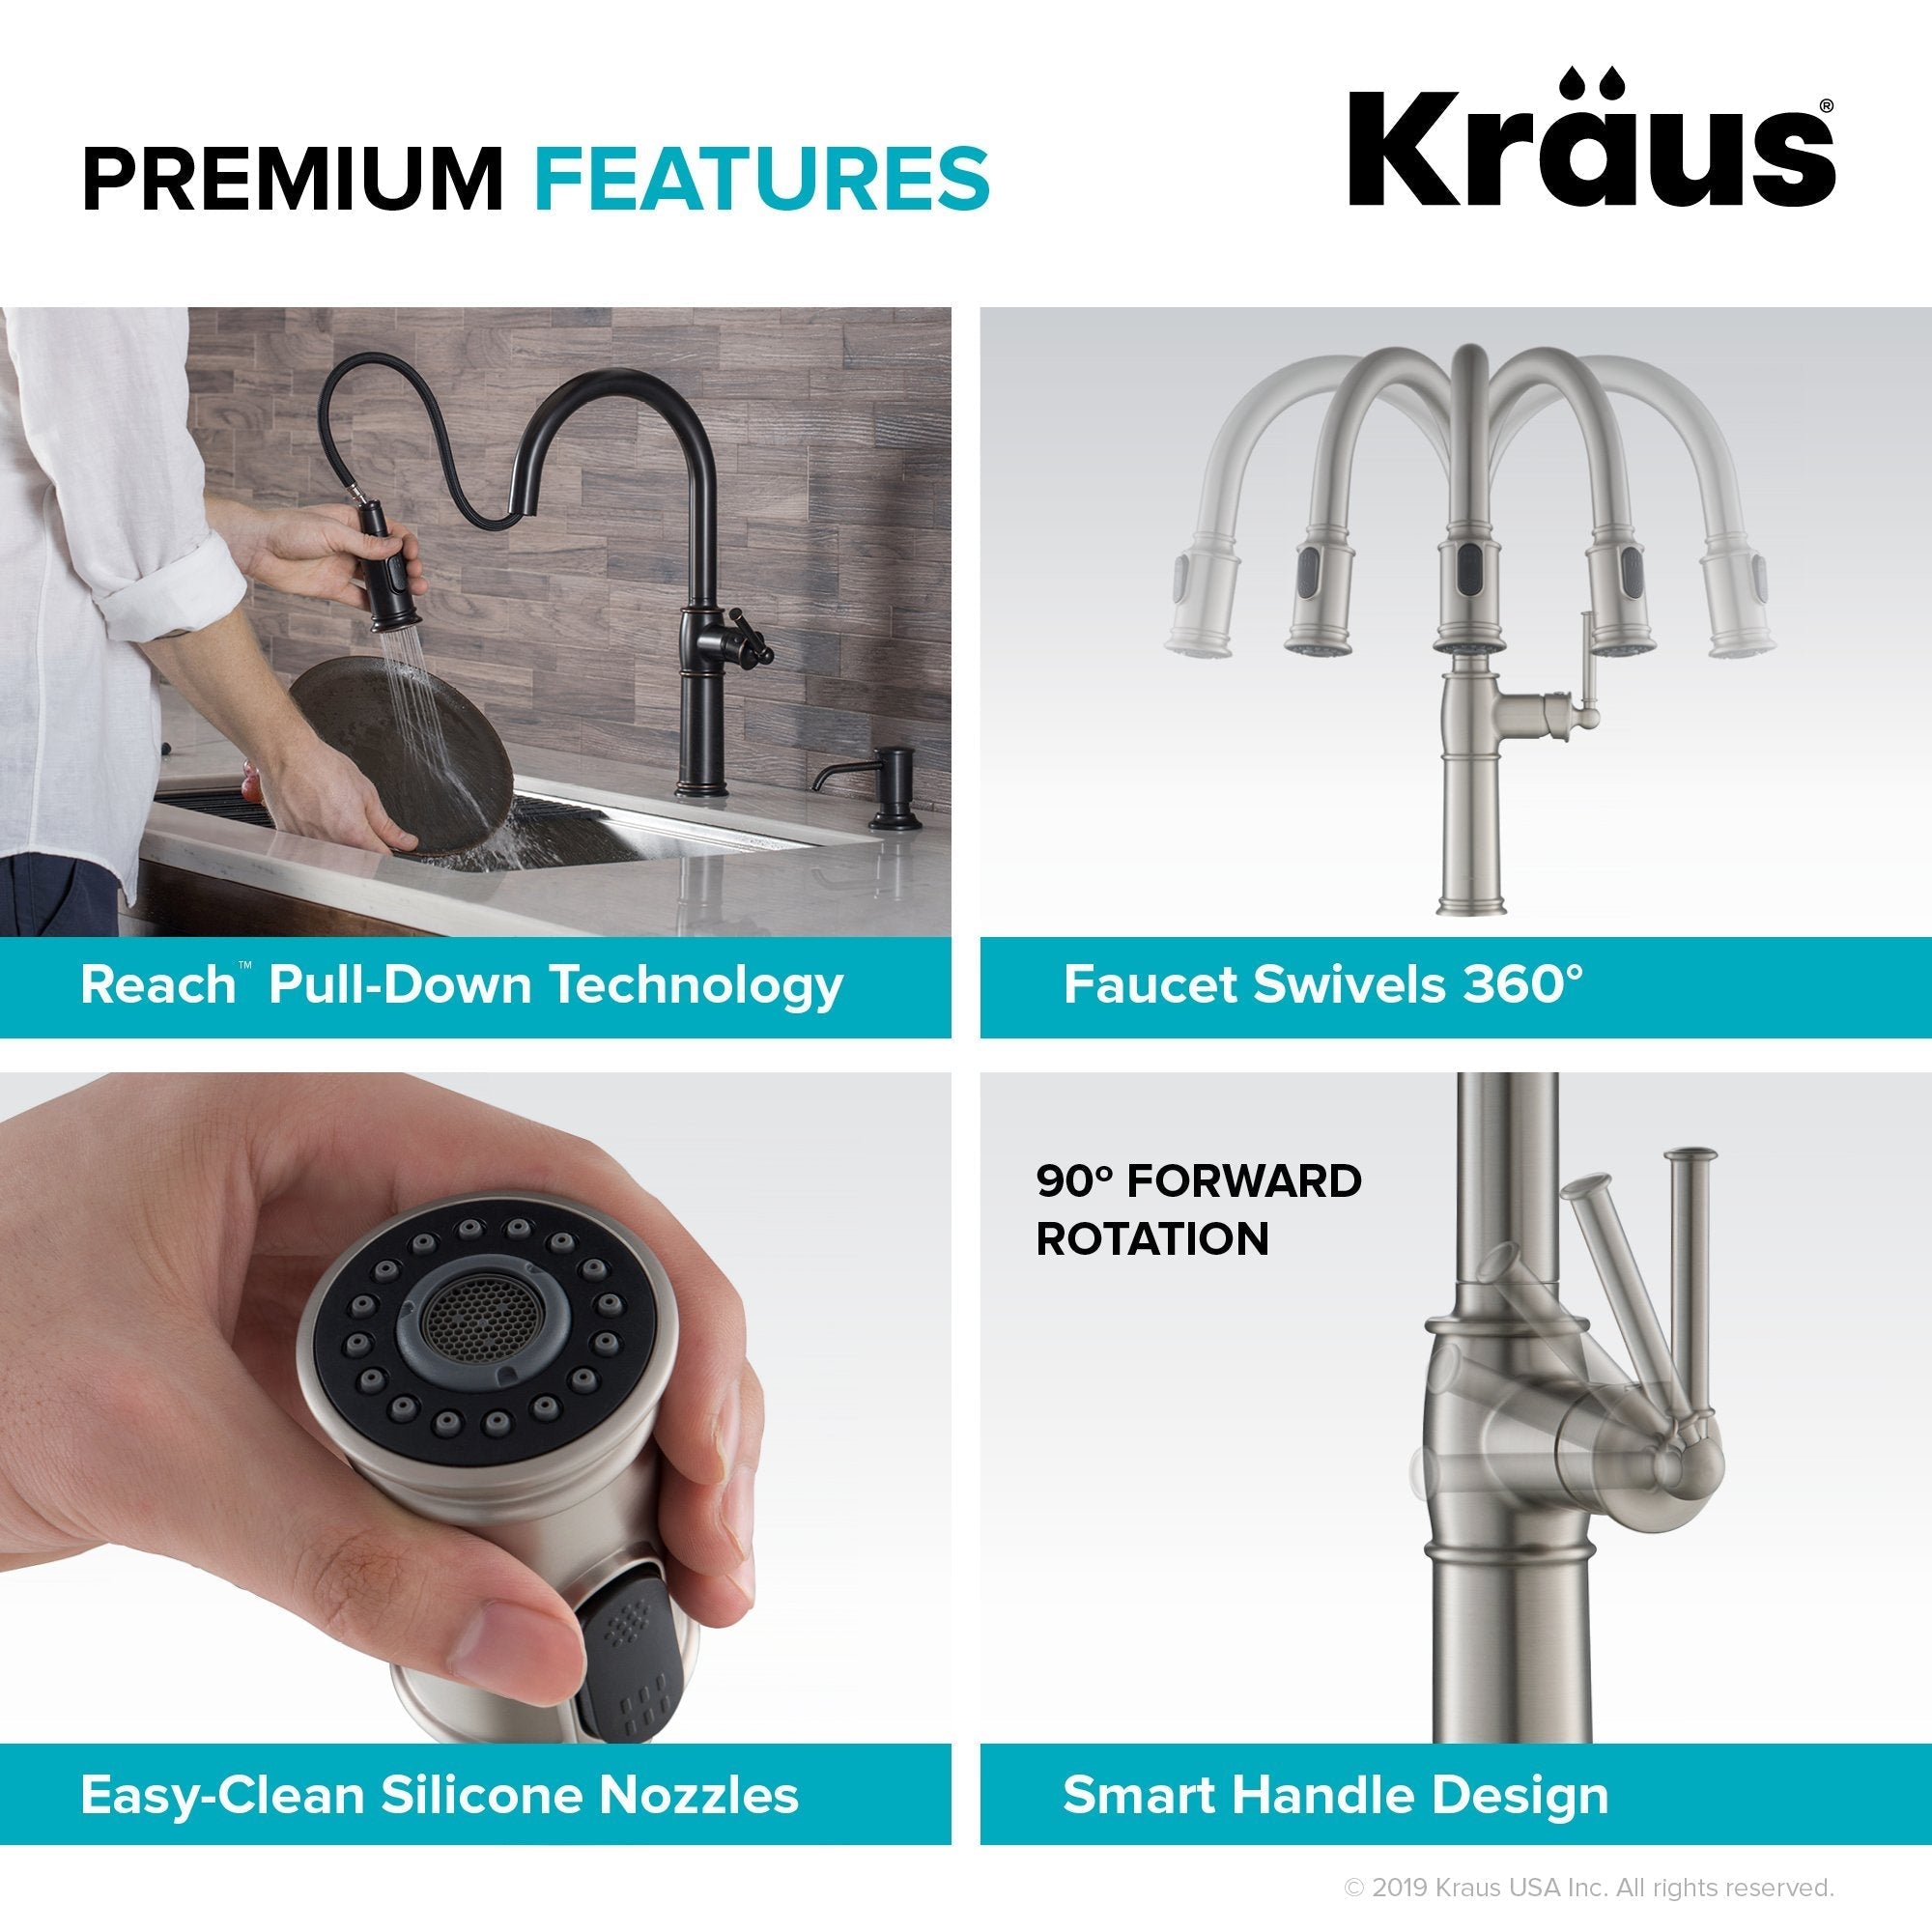 KRAUS Sellette Traditional Single Handle Pull-Down Kitchen Faucet in Oil Rubbed Bronze KPF-1682ORB | DirectSinks